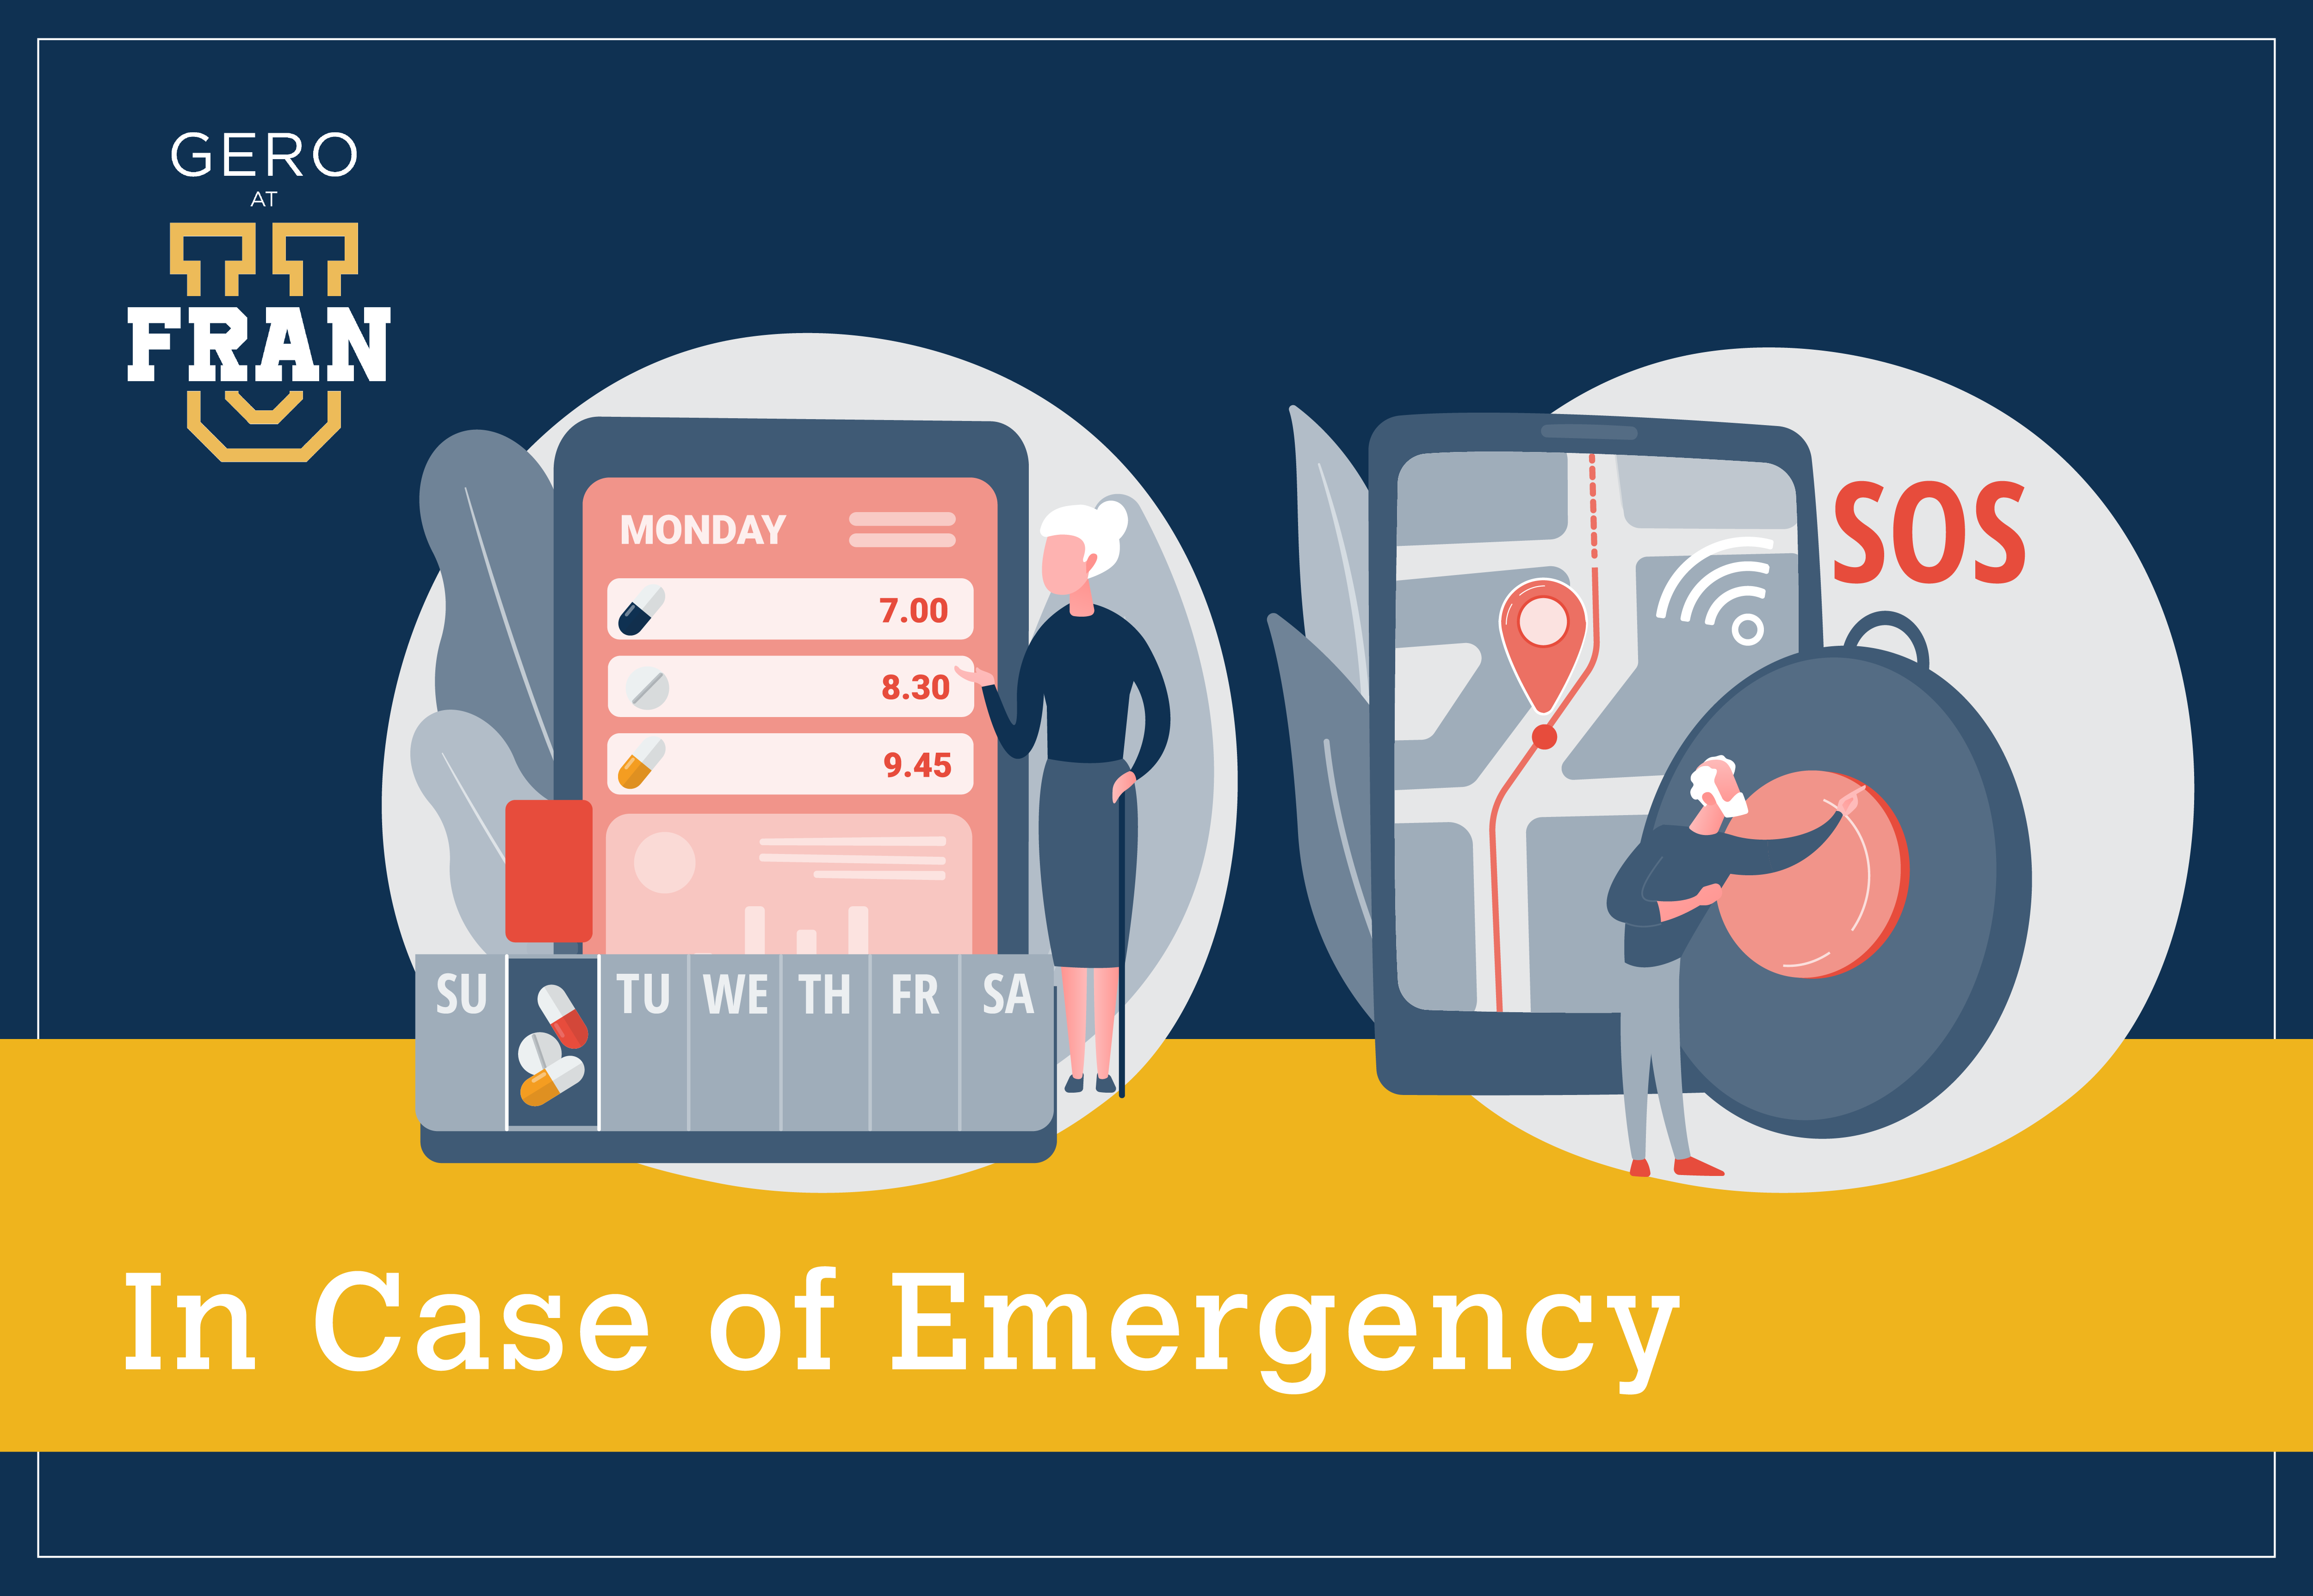 What would you do in case of an emergency? March Blog